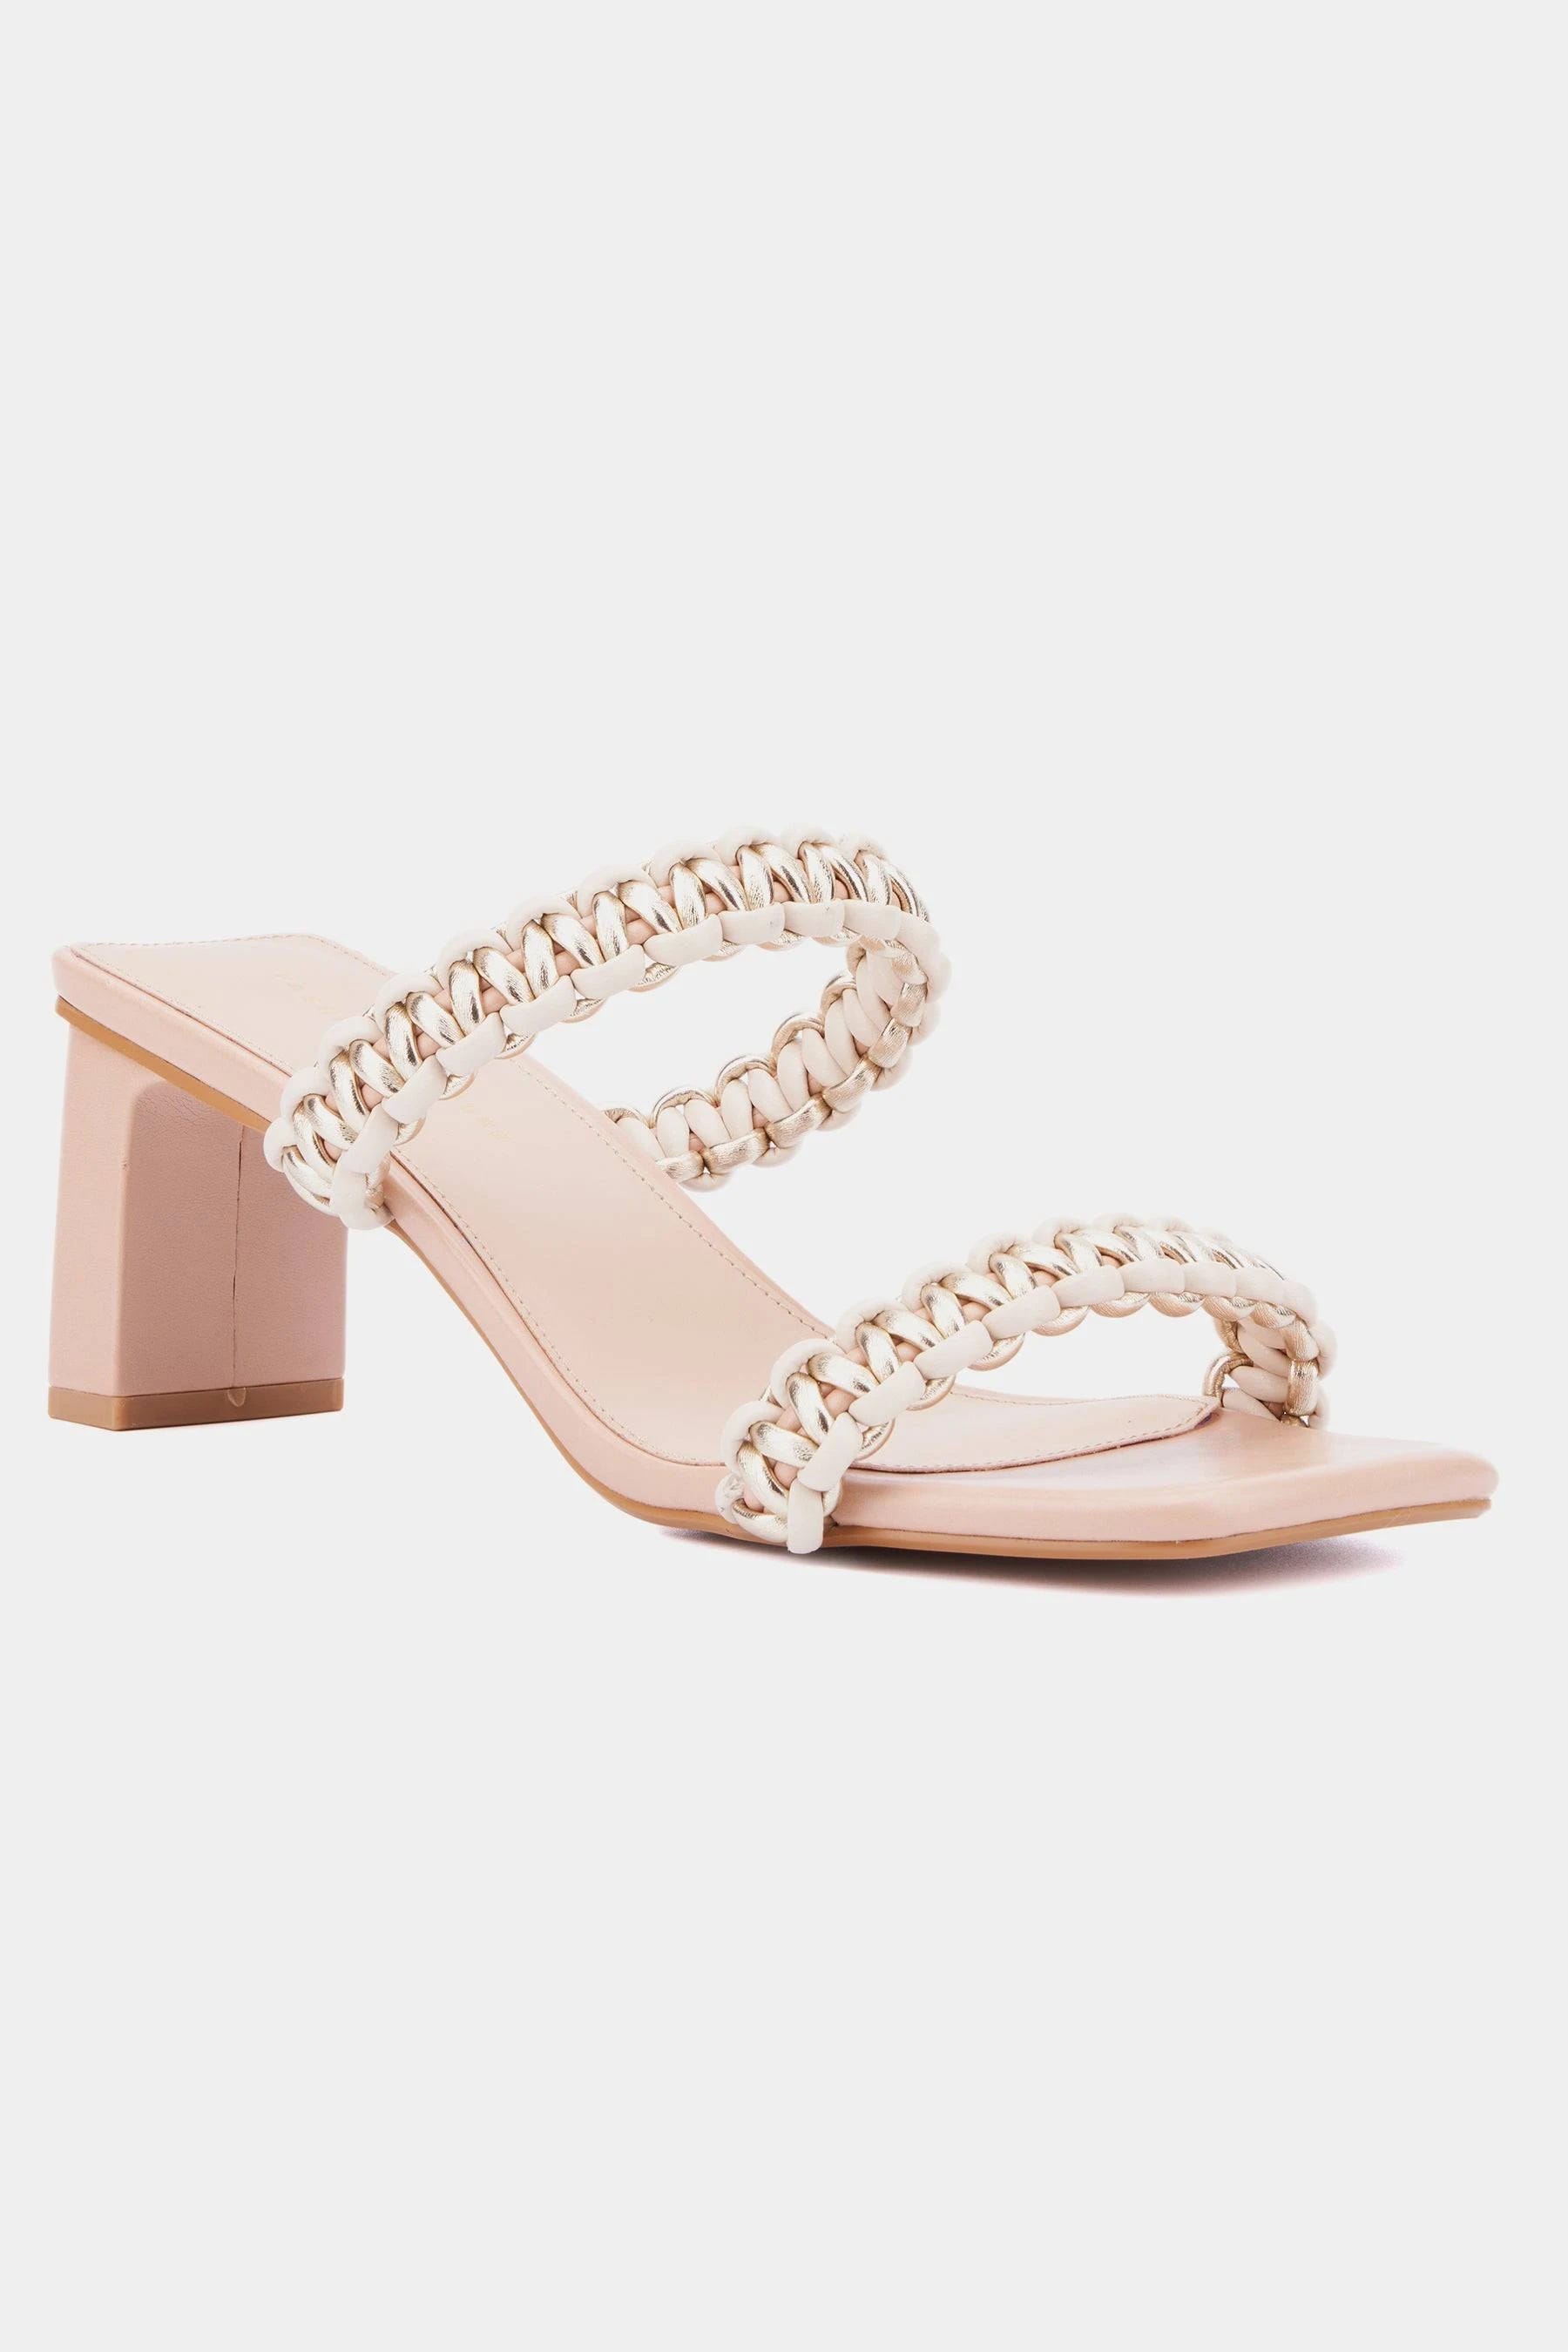 Stylish Nude Sandals for Women in Wide Sizes | Image